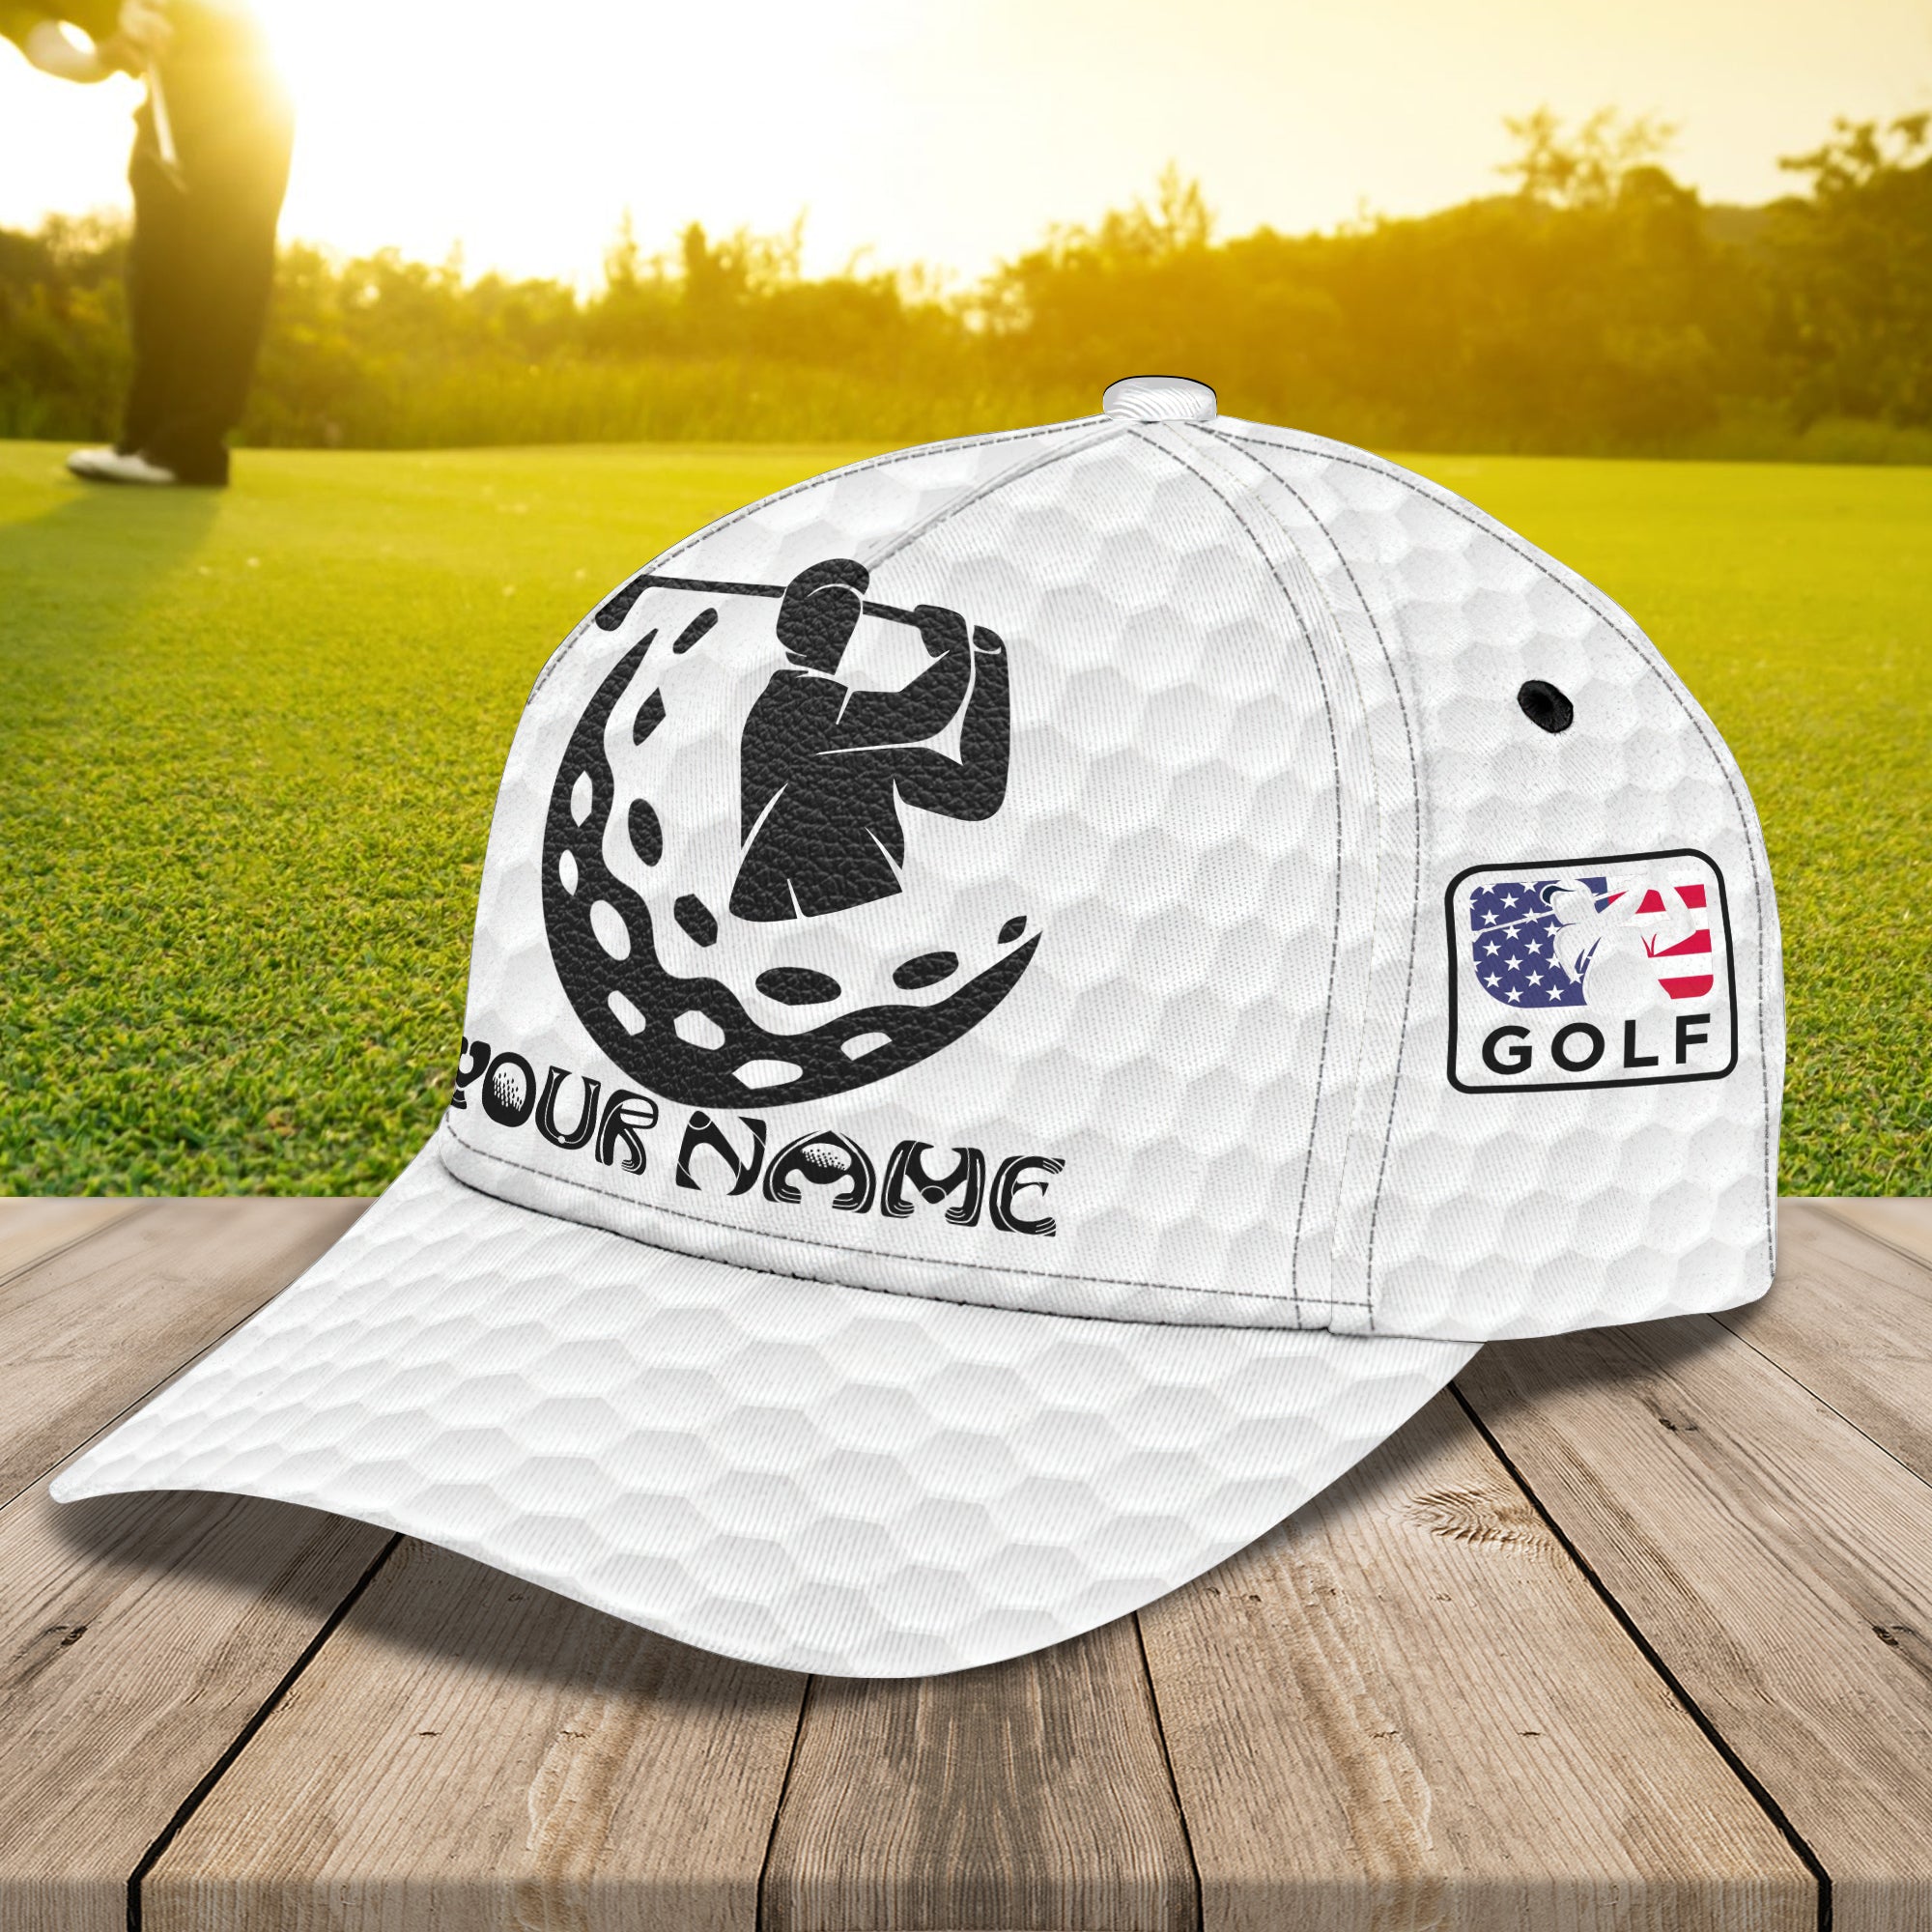 Golf - Personalized Name Cap - Nmd